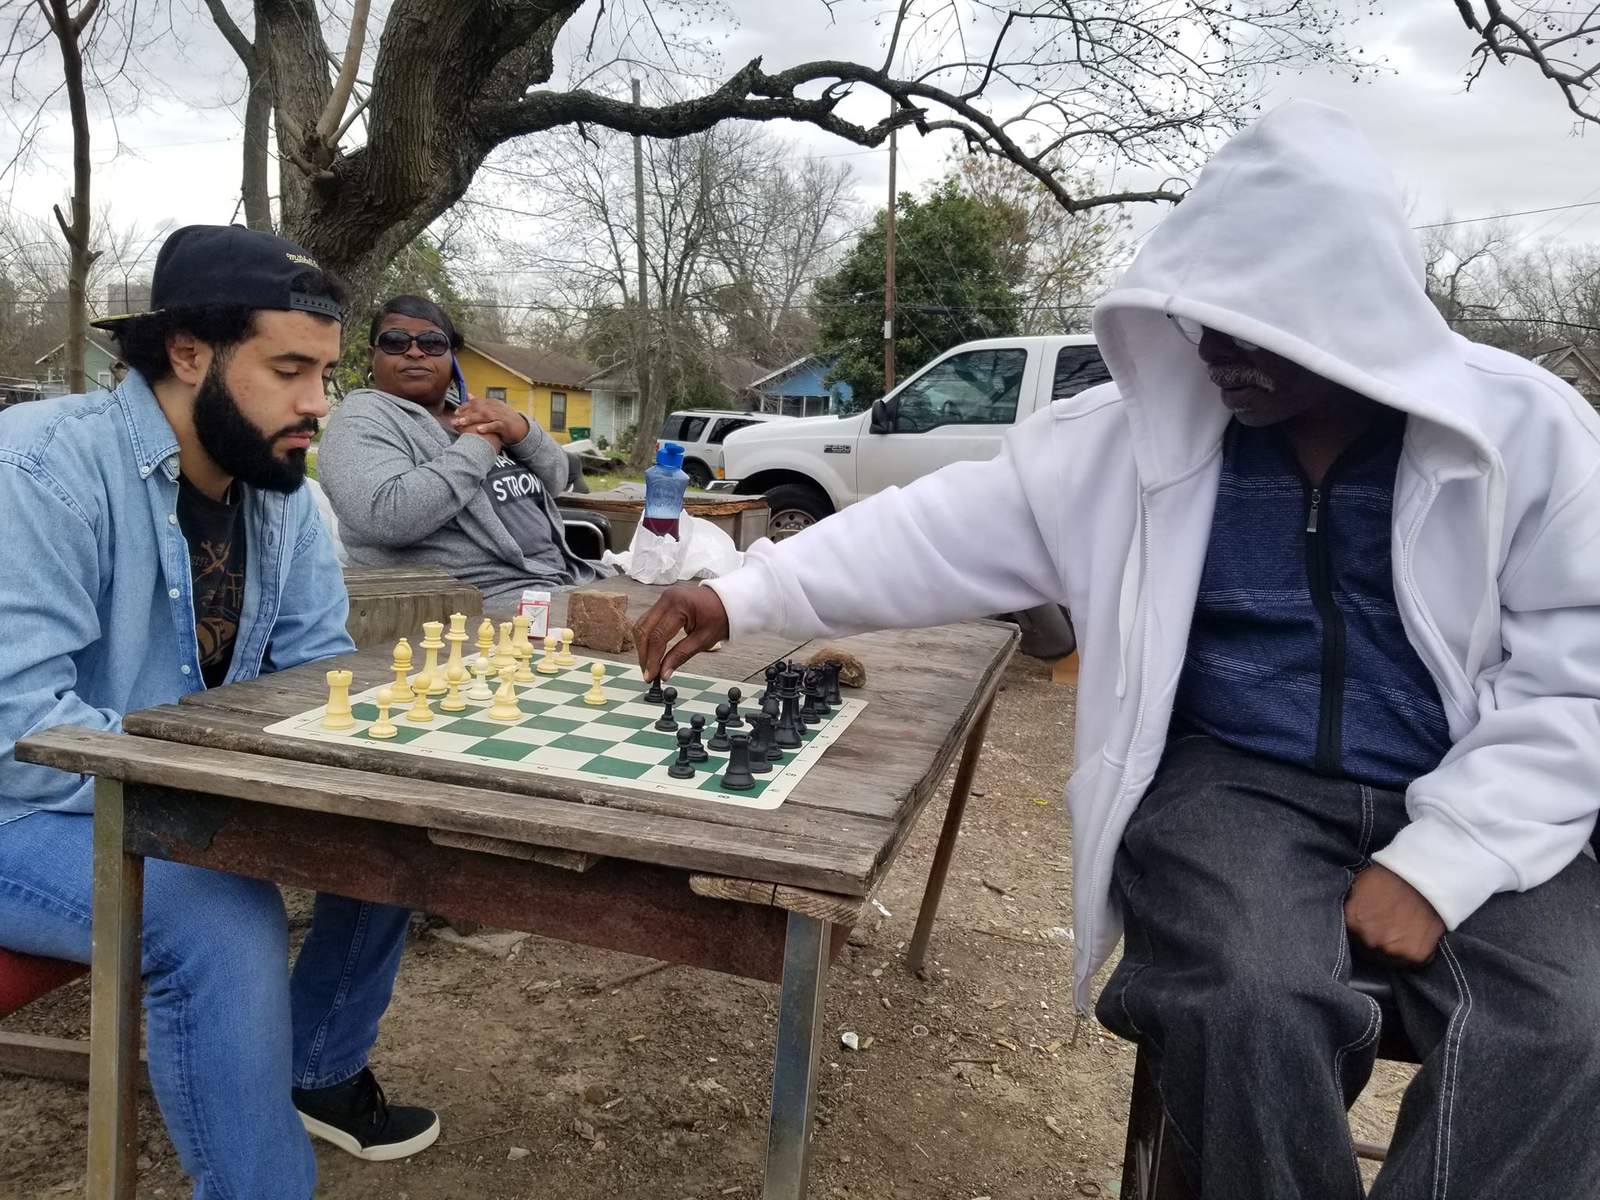 Third Ward opens chess park to revitalize vacant lot in gentrifying community